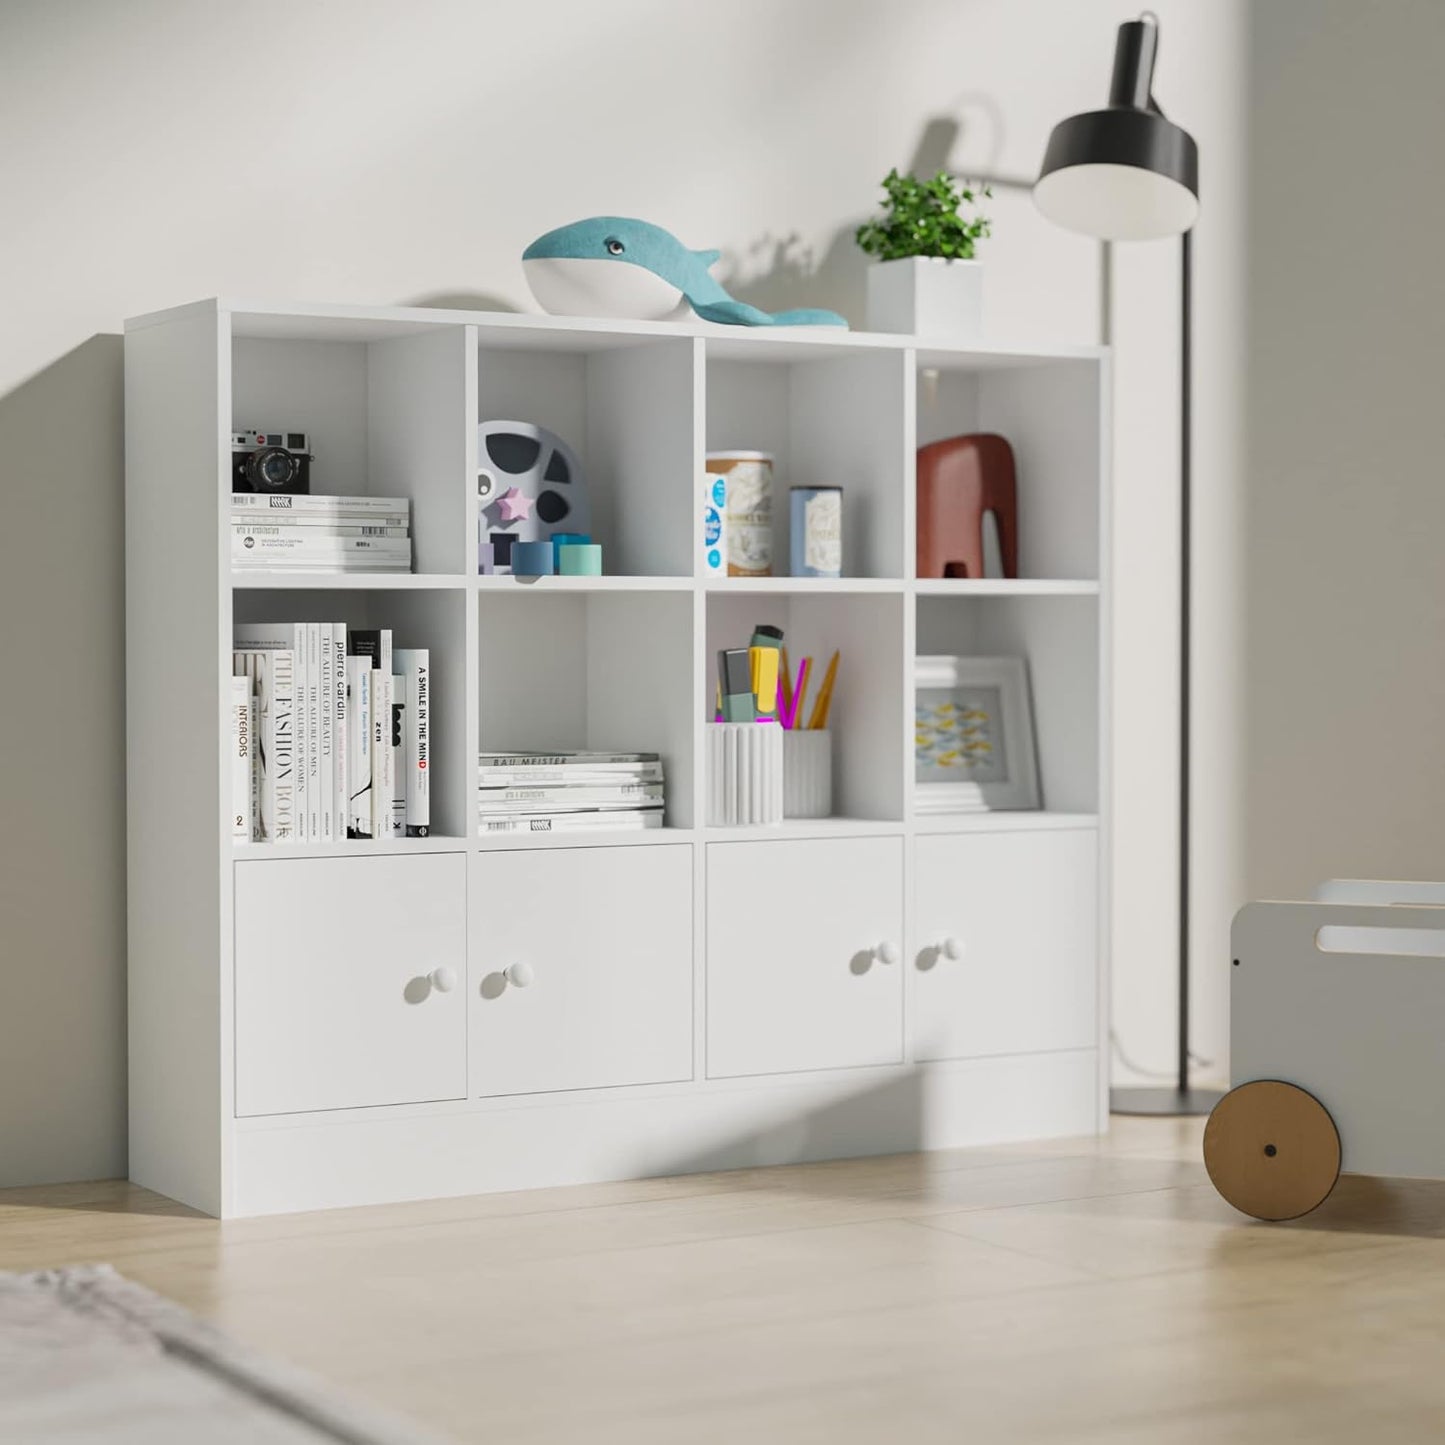 Bookshelf with 12 Cubes and 4 Doors, 2-Tier Open Shelf Bookcase with Anti-Tilt Device for Bedroom, Living Room